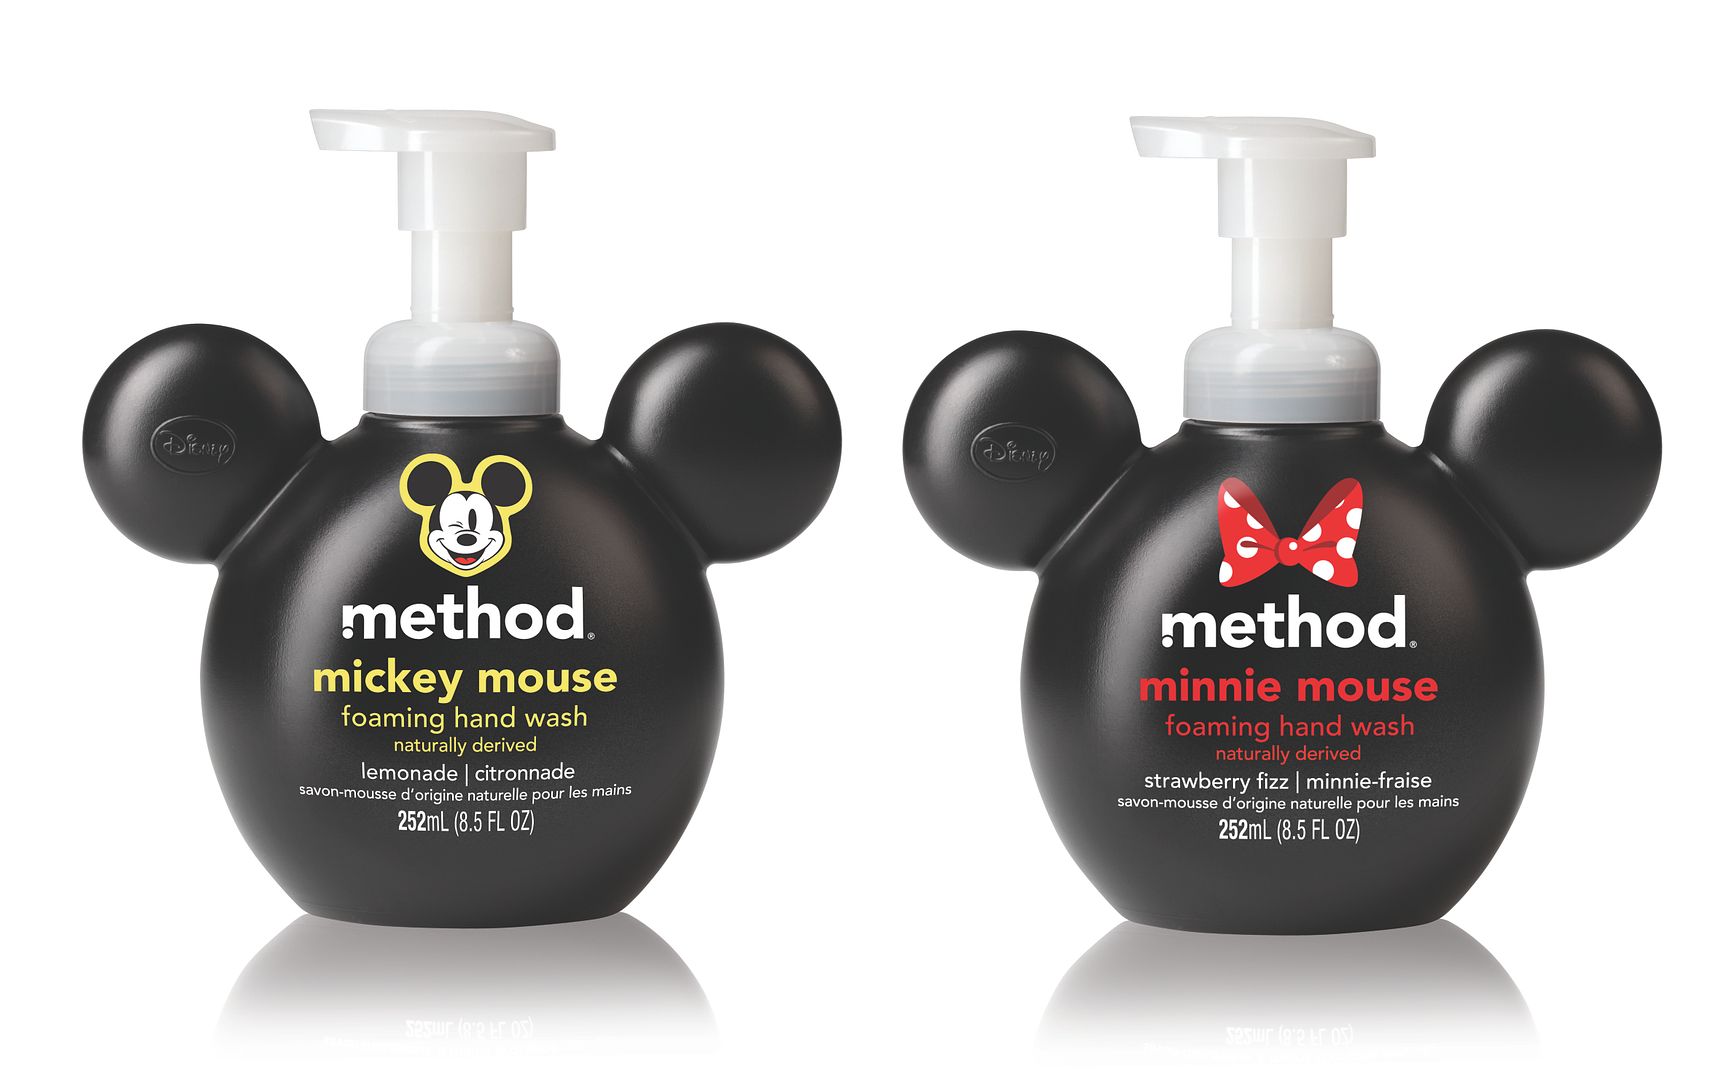 Safe soaps for babies and kids  - Method Mickey Mouse Hand Soaps | Cool Mom Picks